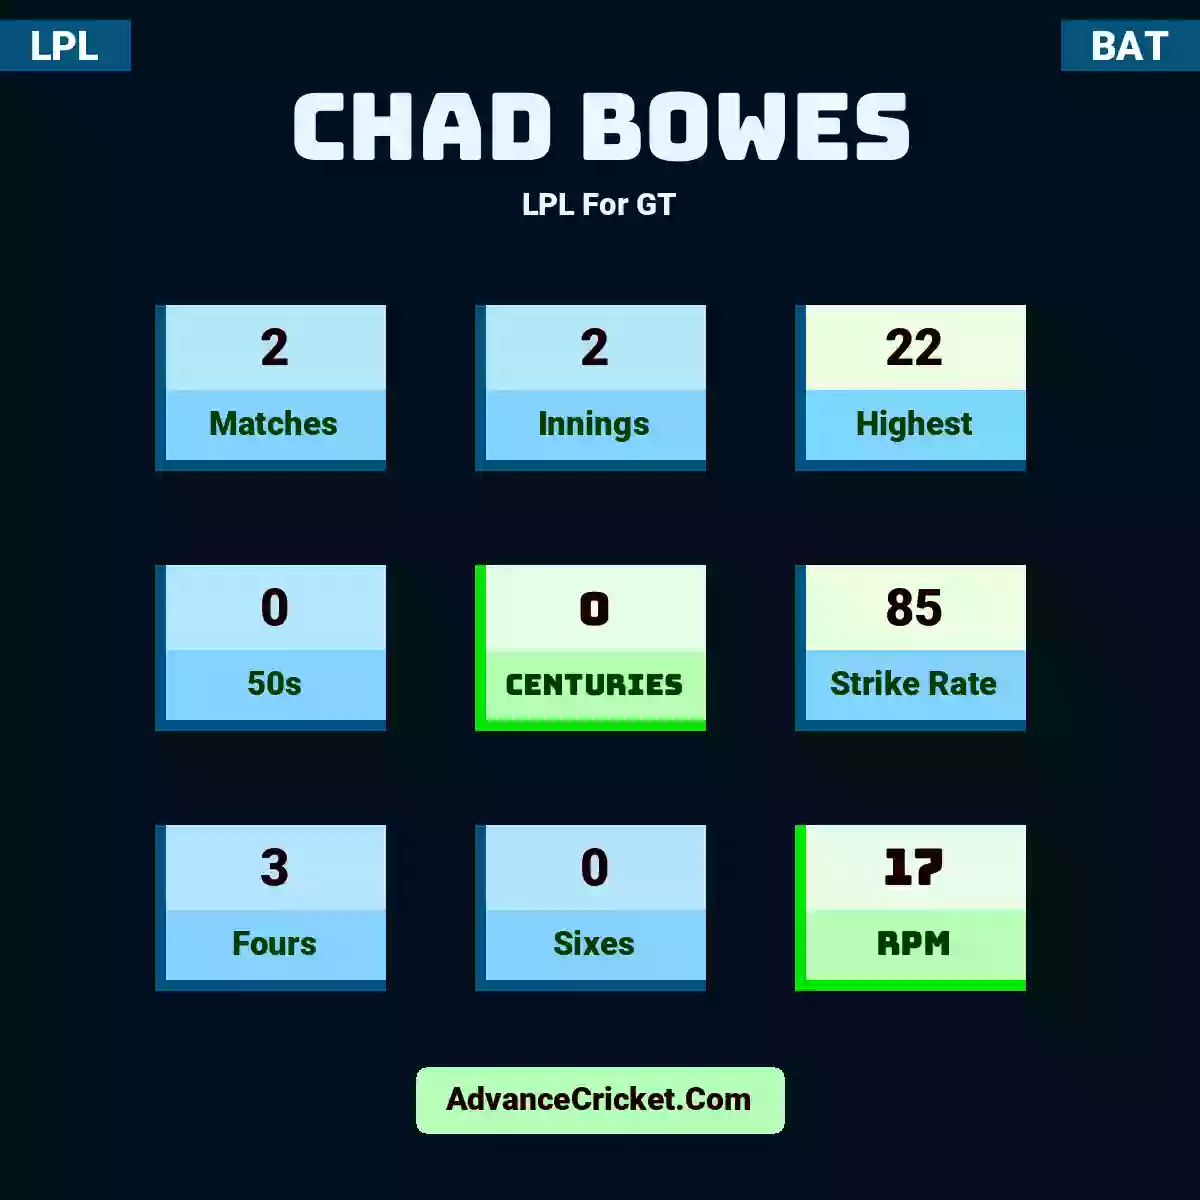 Chad Bowes LPL  For GT, Chad Bowes played 2 matches, scored 22 runs as highest, 0 half-centuries, and 0 centuries, with a strike rate of 85. C.Bowes hit 3 fours and 0 sixes, with an RPM of 17.